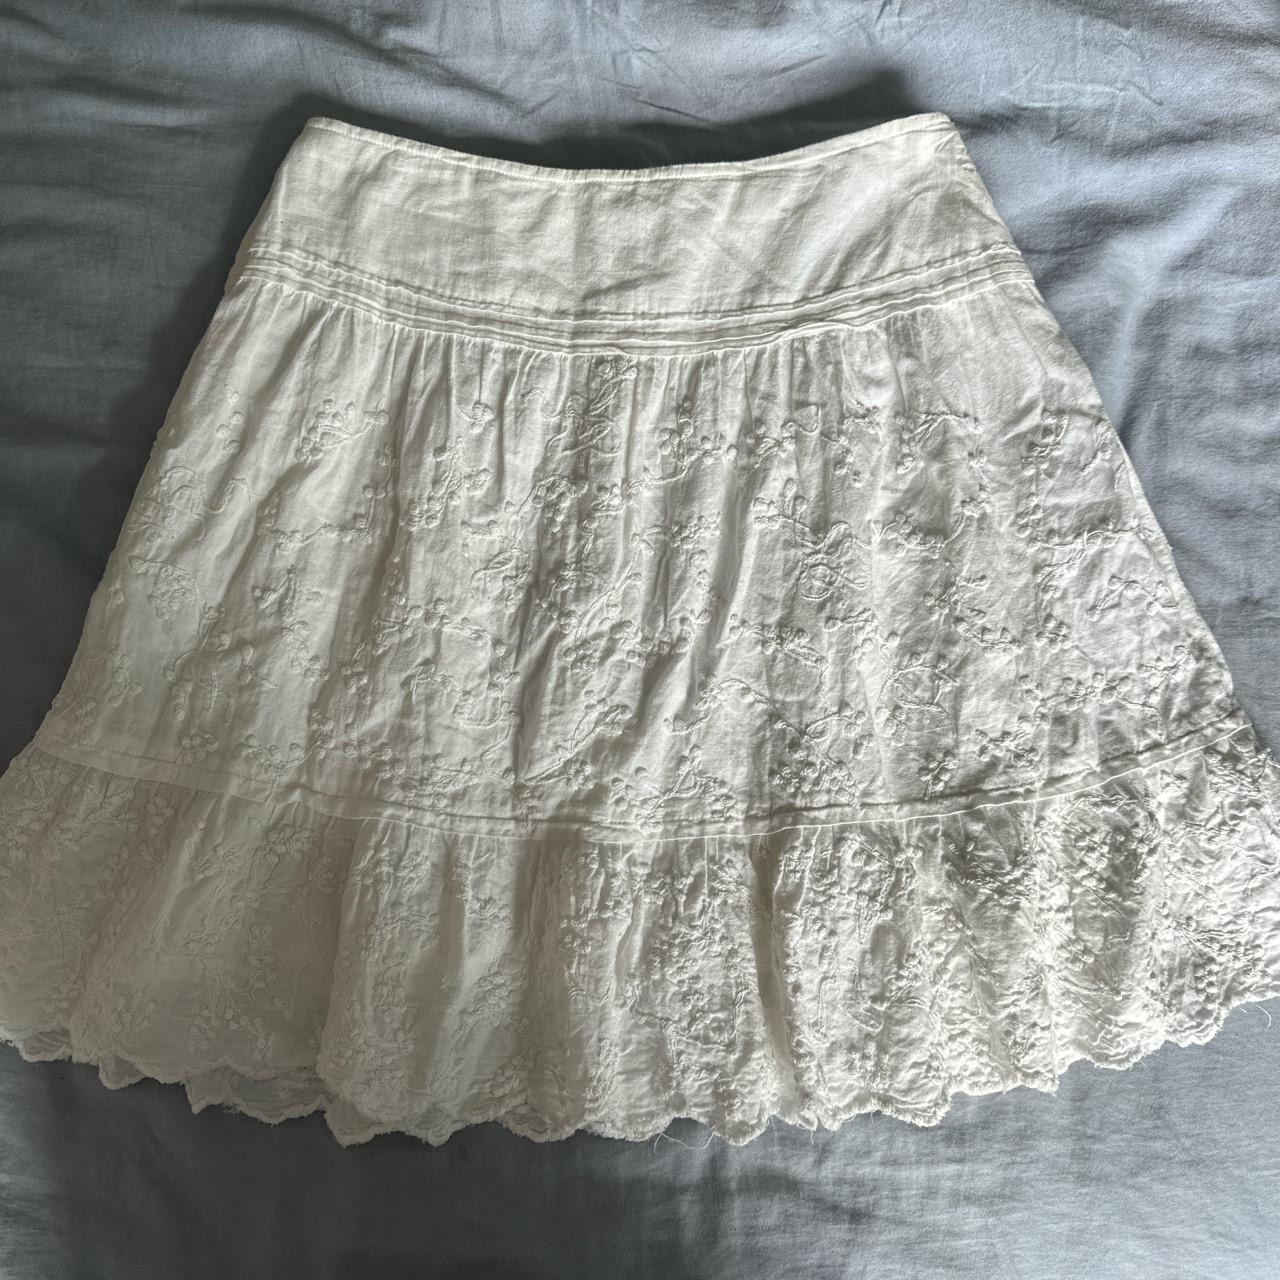 White floral skirt made in India size S/M - Depop